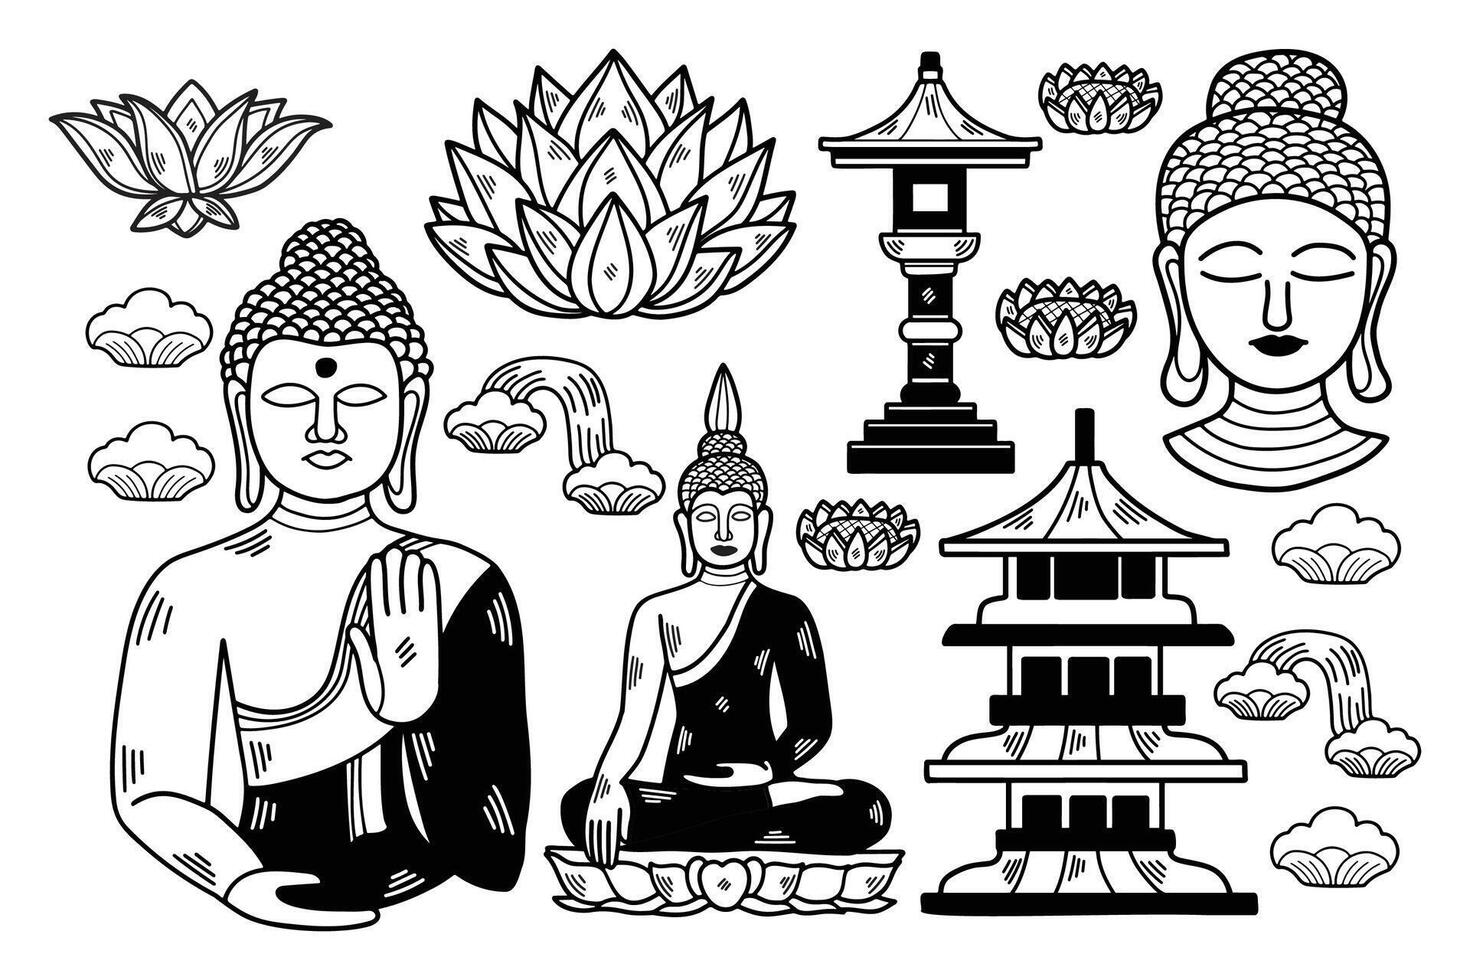 A black and white drawing of a Buddhist monk, a lotus flower, and a pagoda vector